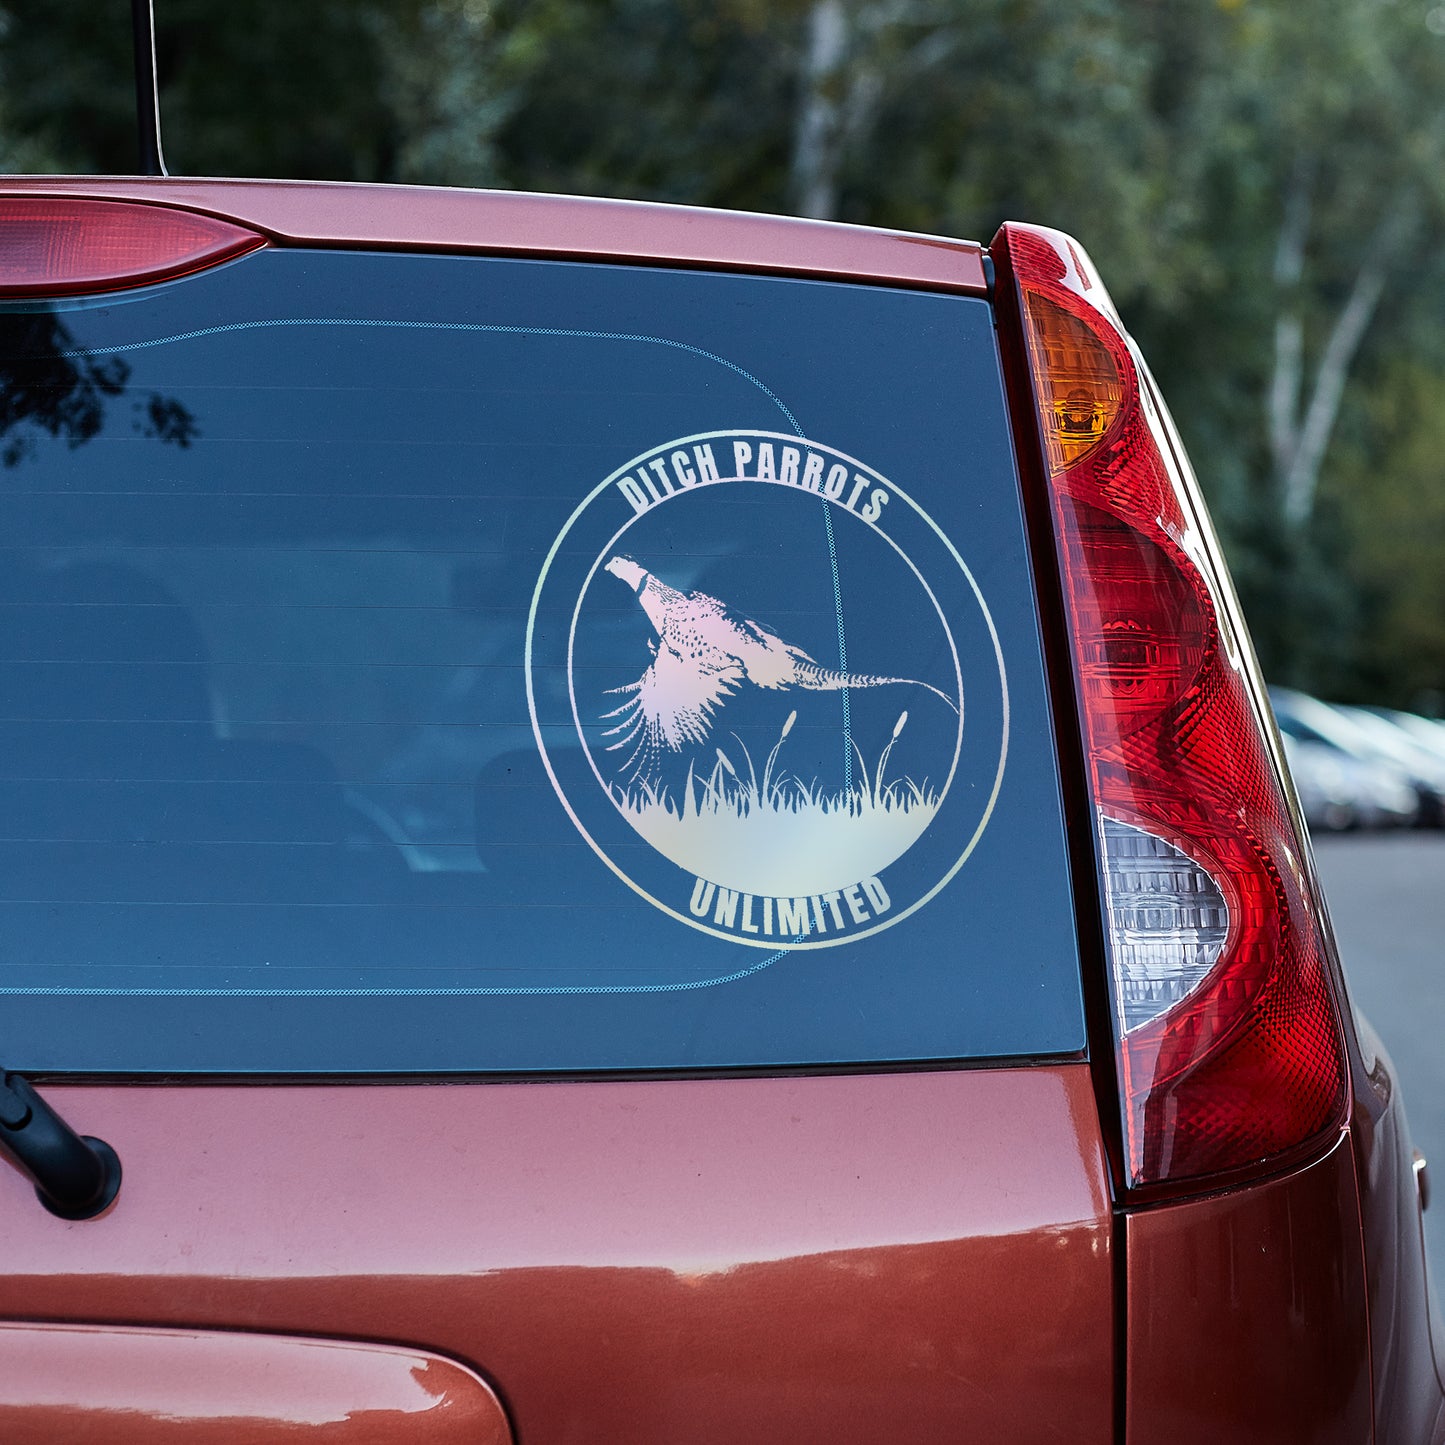 Ditch Parrots Unlimited Vinyl decal decal stickers Decals for cars Decals for Trucks decals for tumblers deer decals for trucks deer hunter hunting hunting decal minivan sticker SUV decals truck decals window decal car Window decals window decor